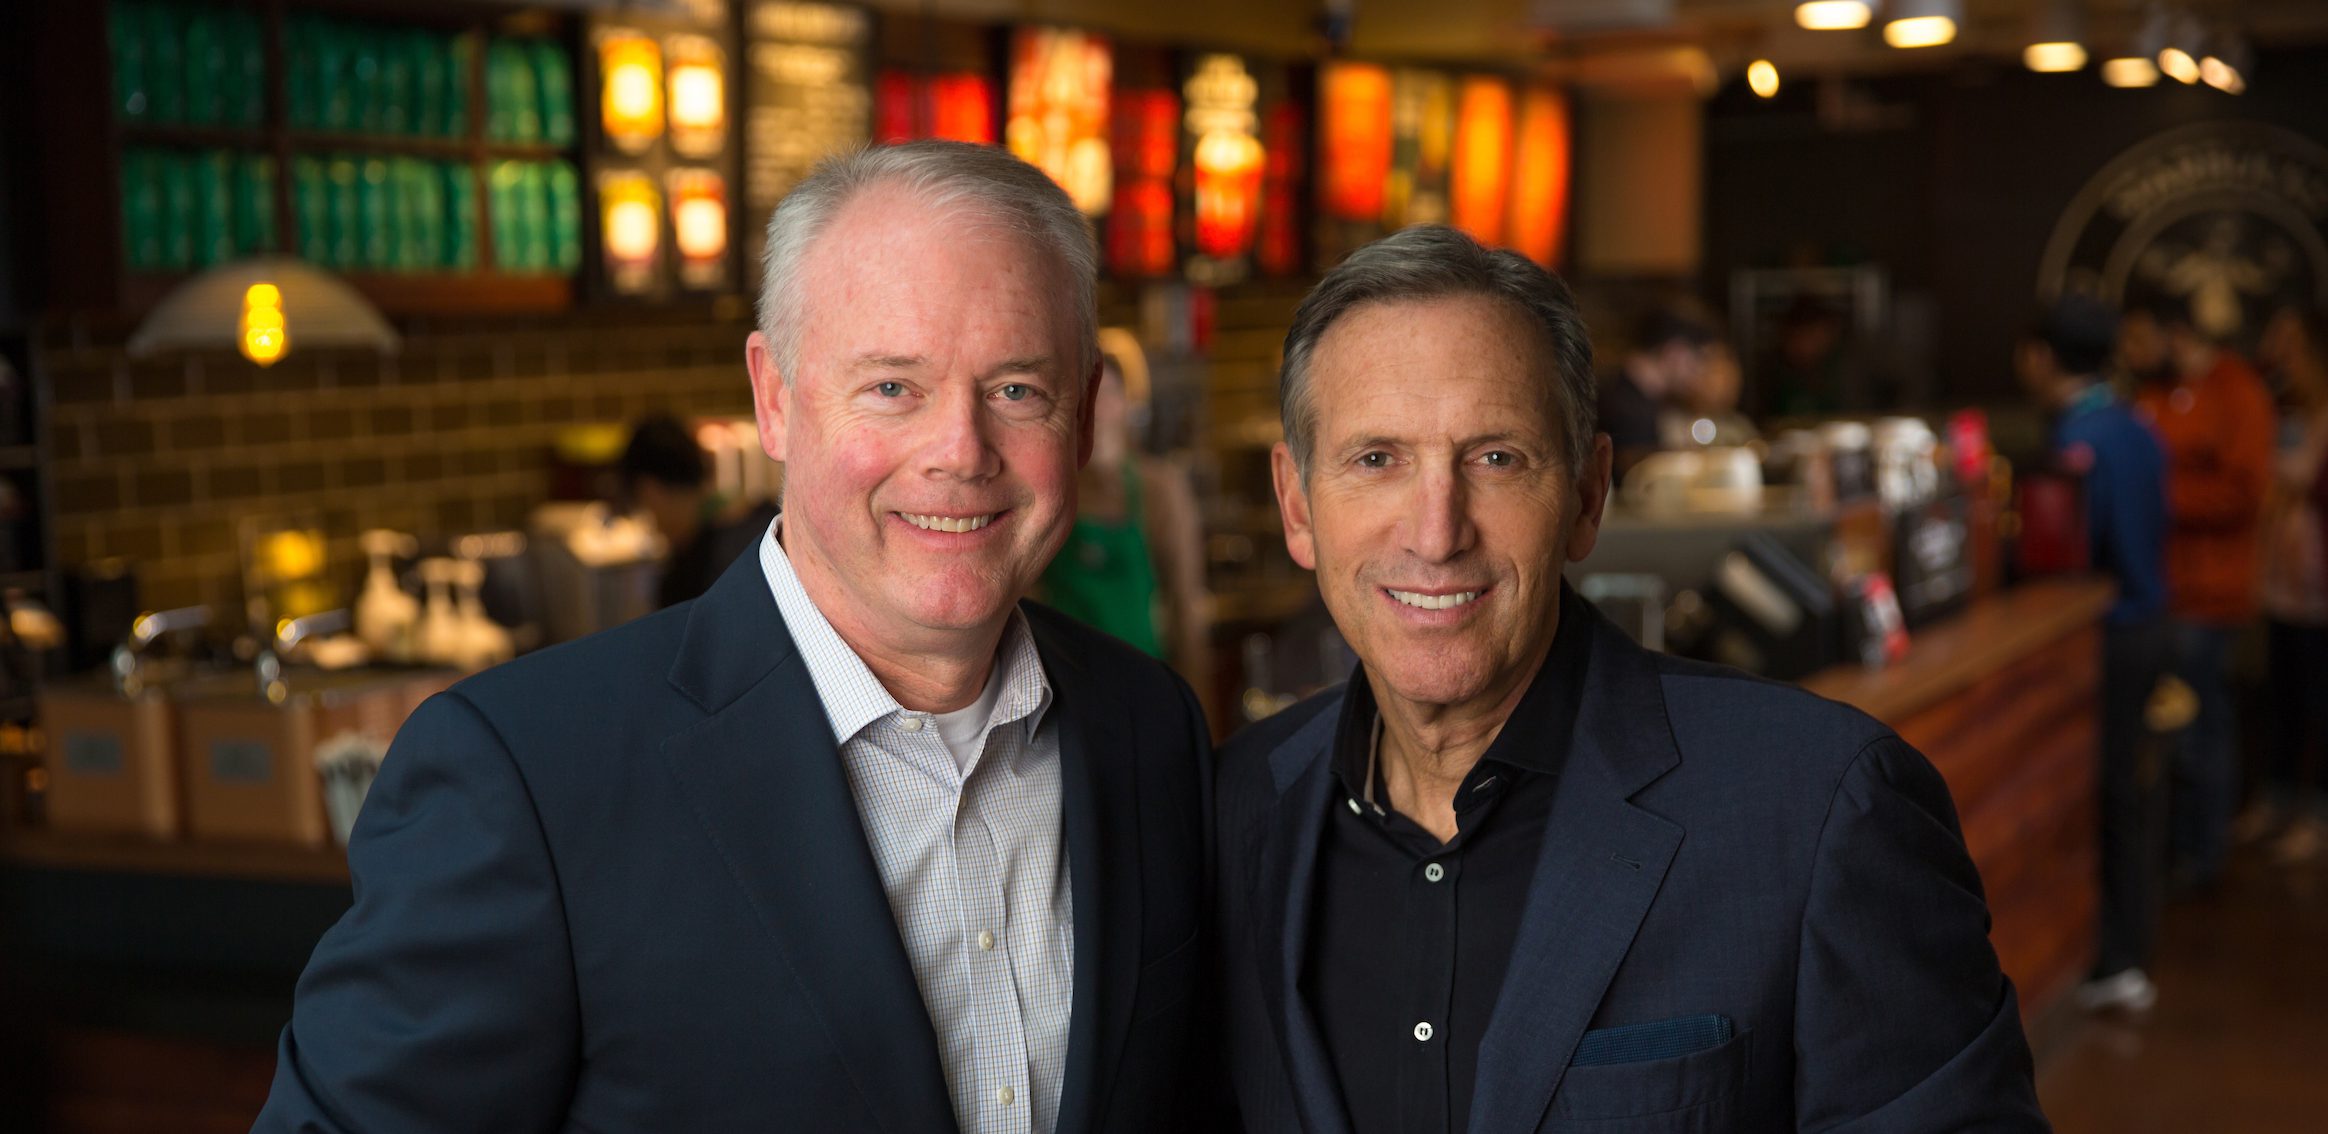 Starbucks CEO Howard Schultz Stepping Down To Focus On Upscale Coffee